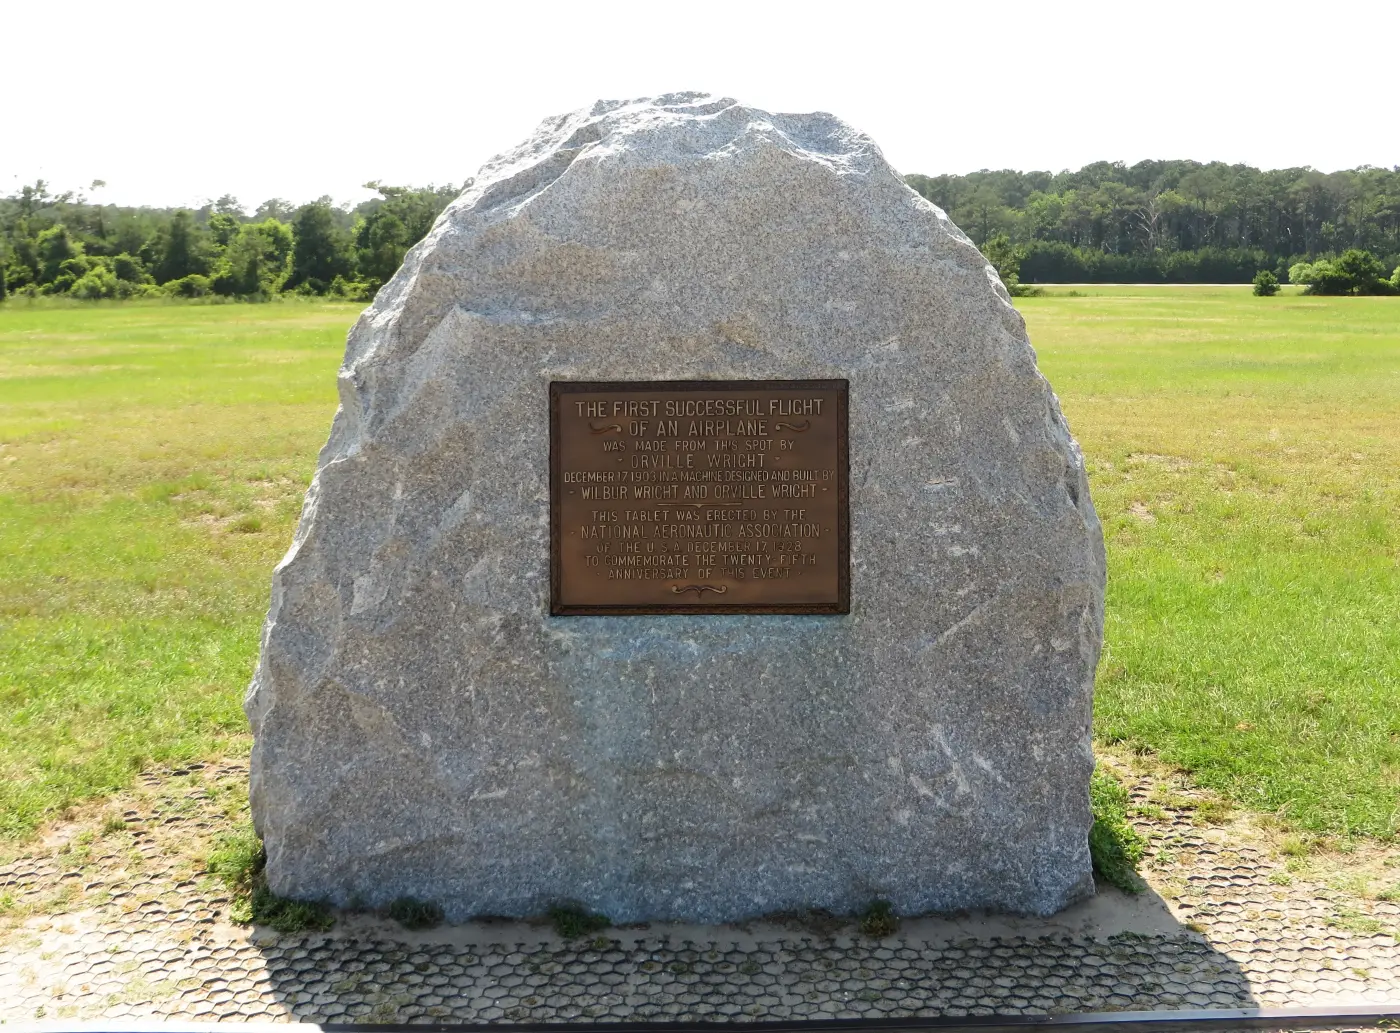 Kitty Hawk was the Wright brothers' first flight location